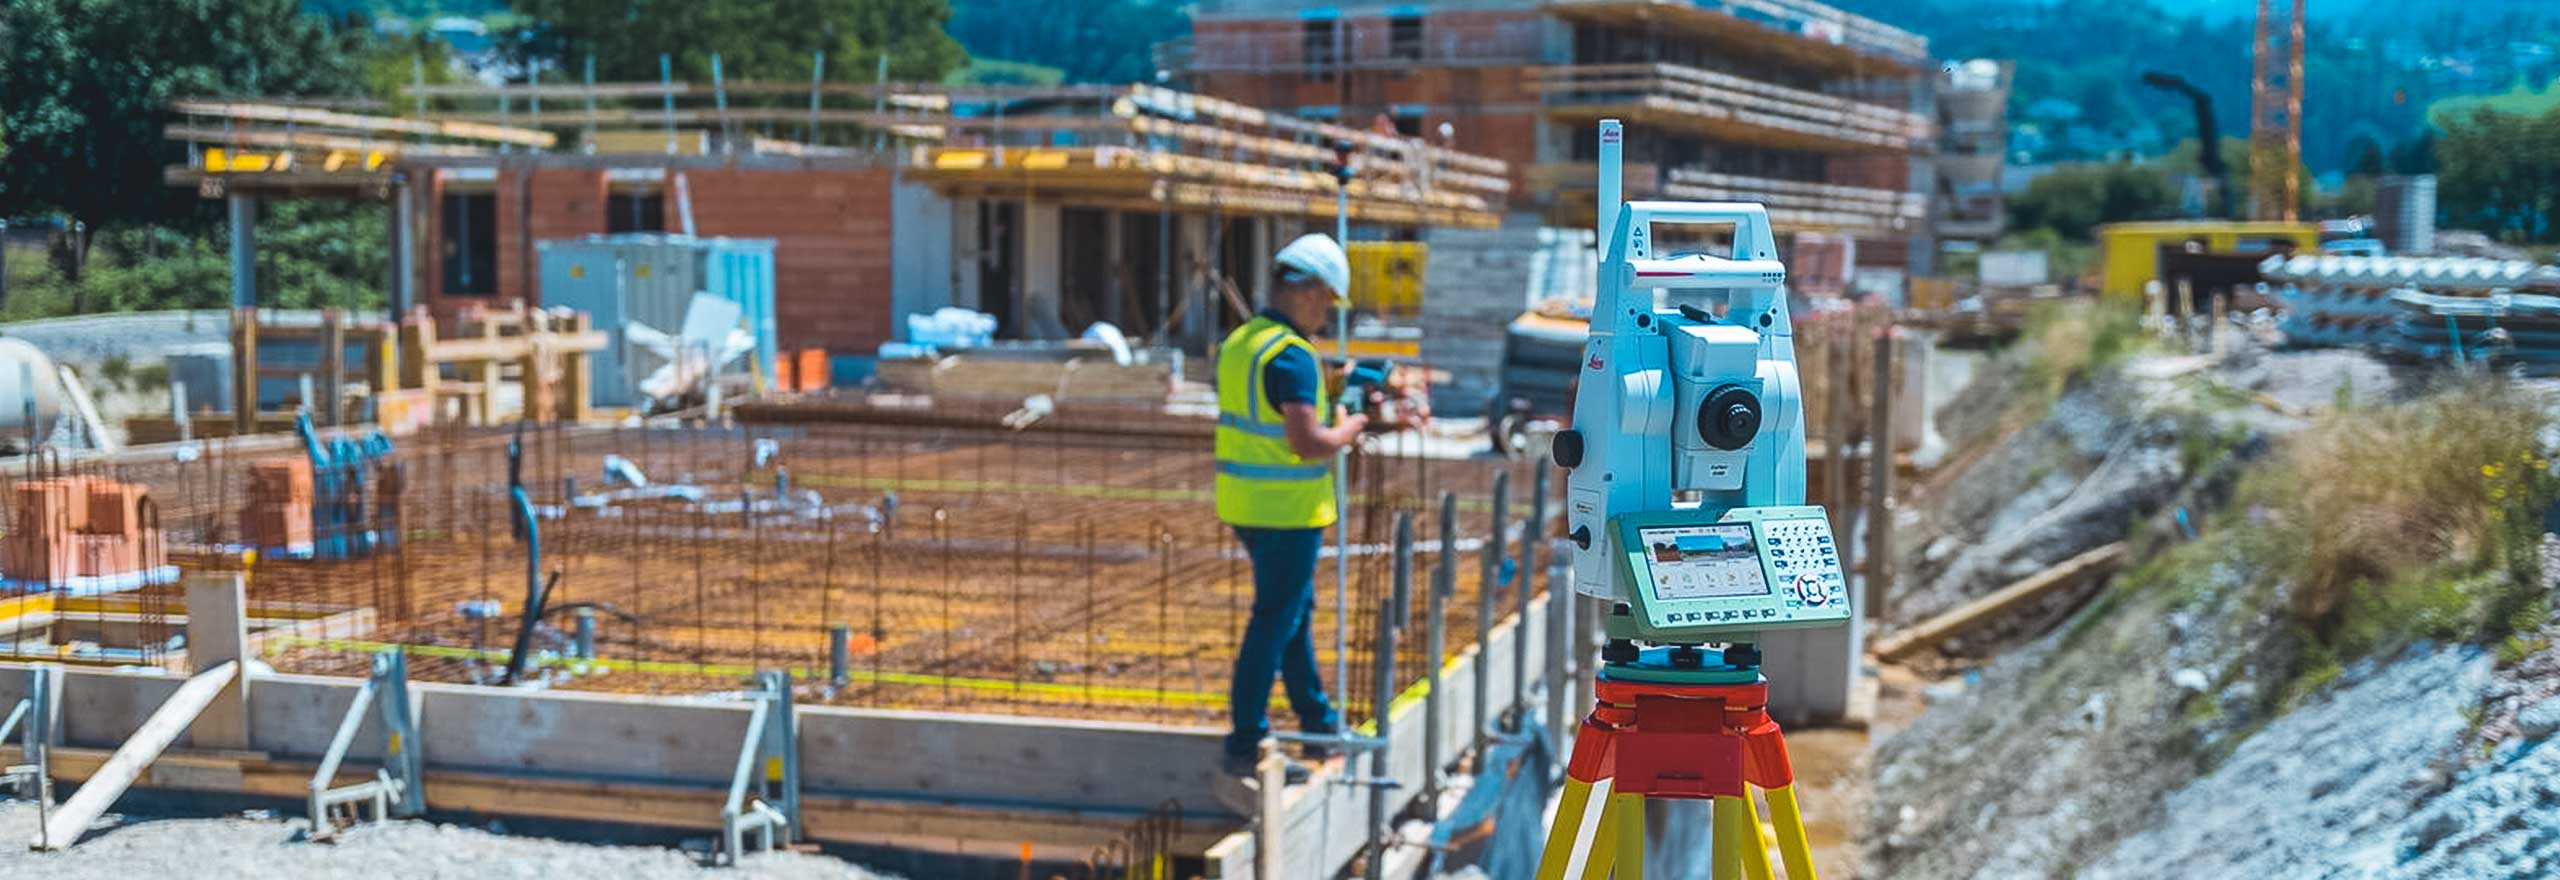 Surveyor on site with Leica TS16 Total Station 